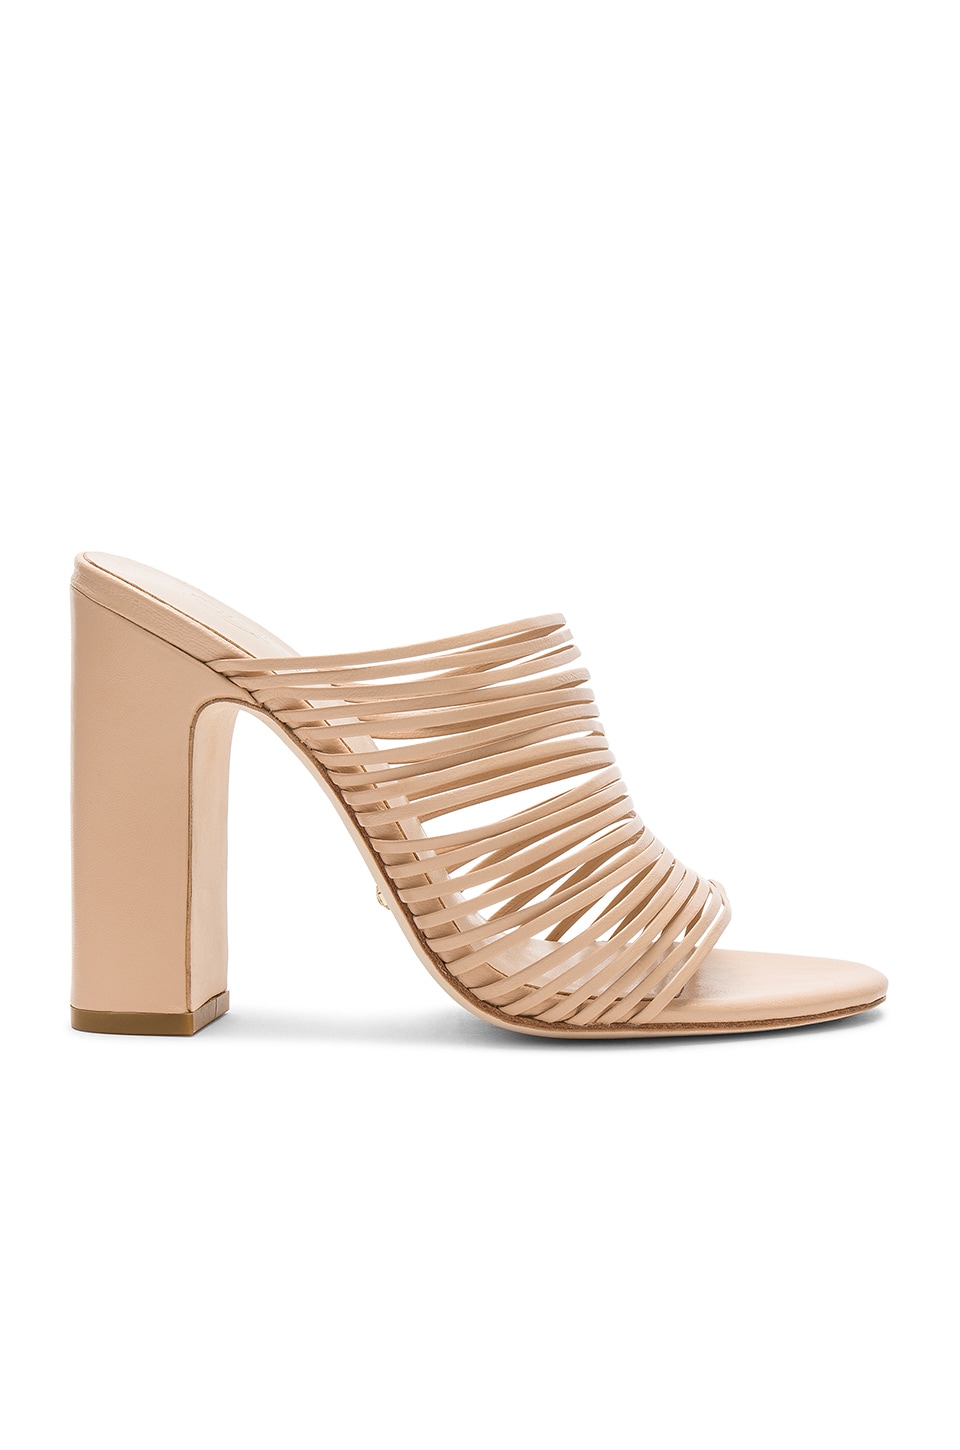 RAYE x House Of Harlow 1960 Fawn Mule in Nude | REVOLVE